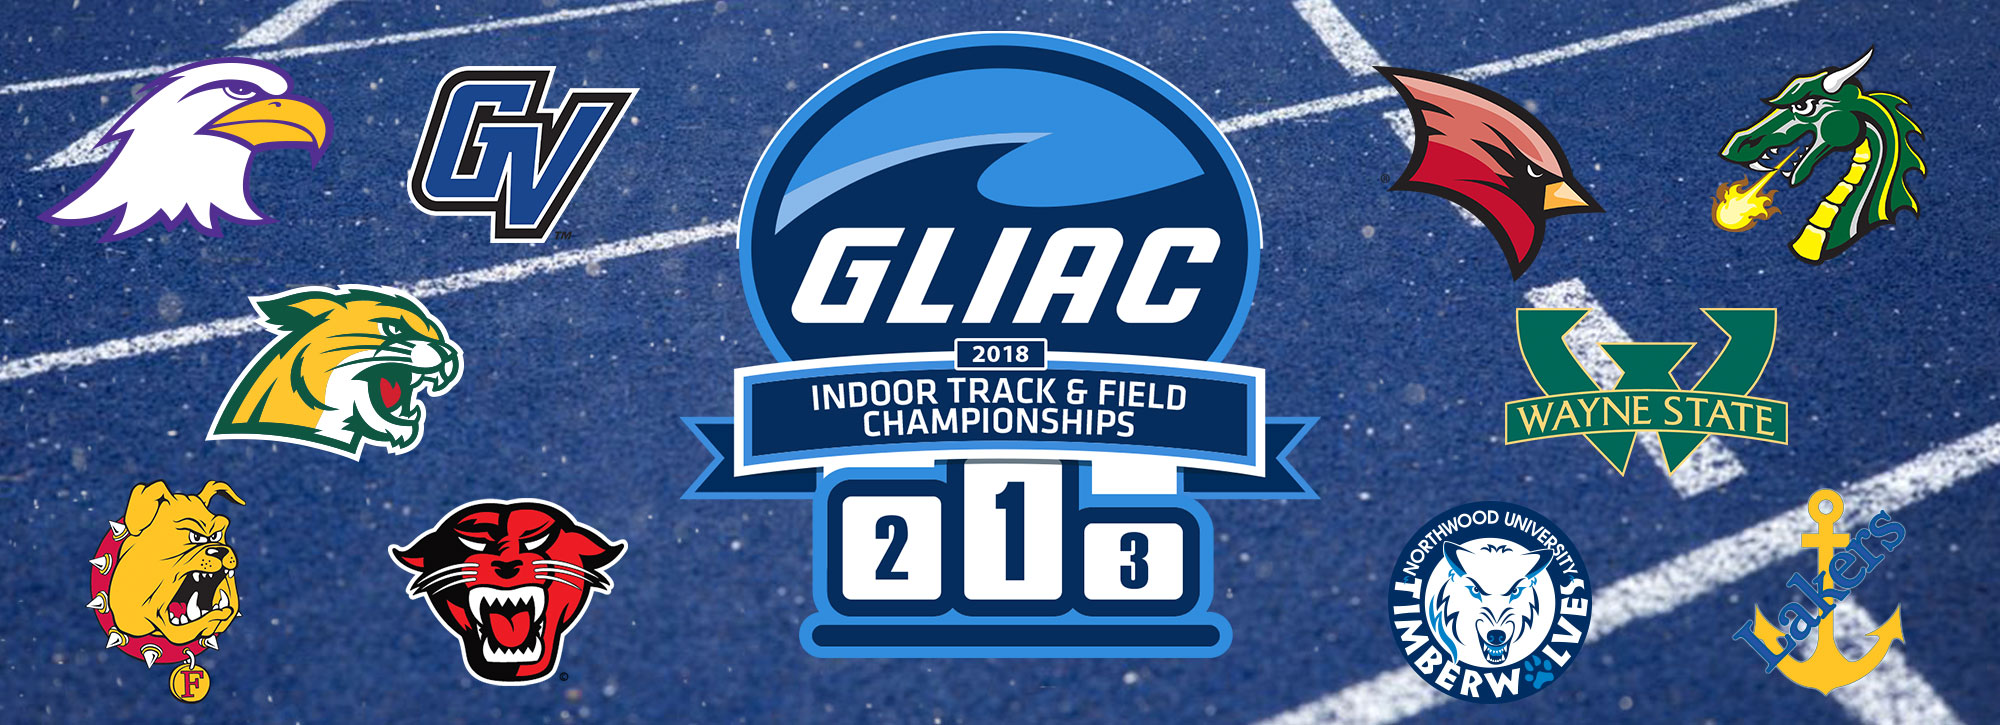 Grand Valley State Hosts 2018 GLIAC Indoor Track & Field Championships